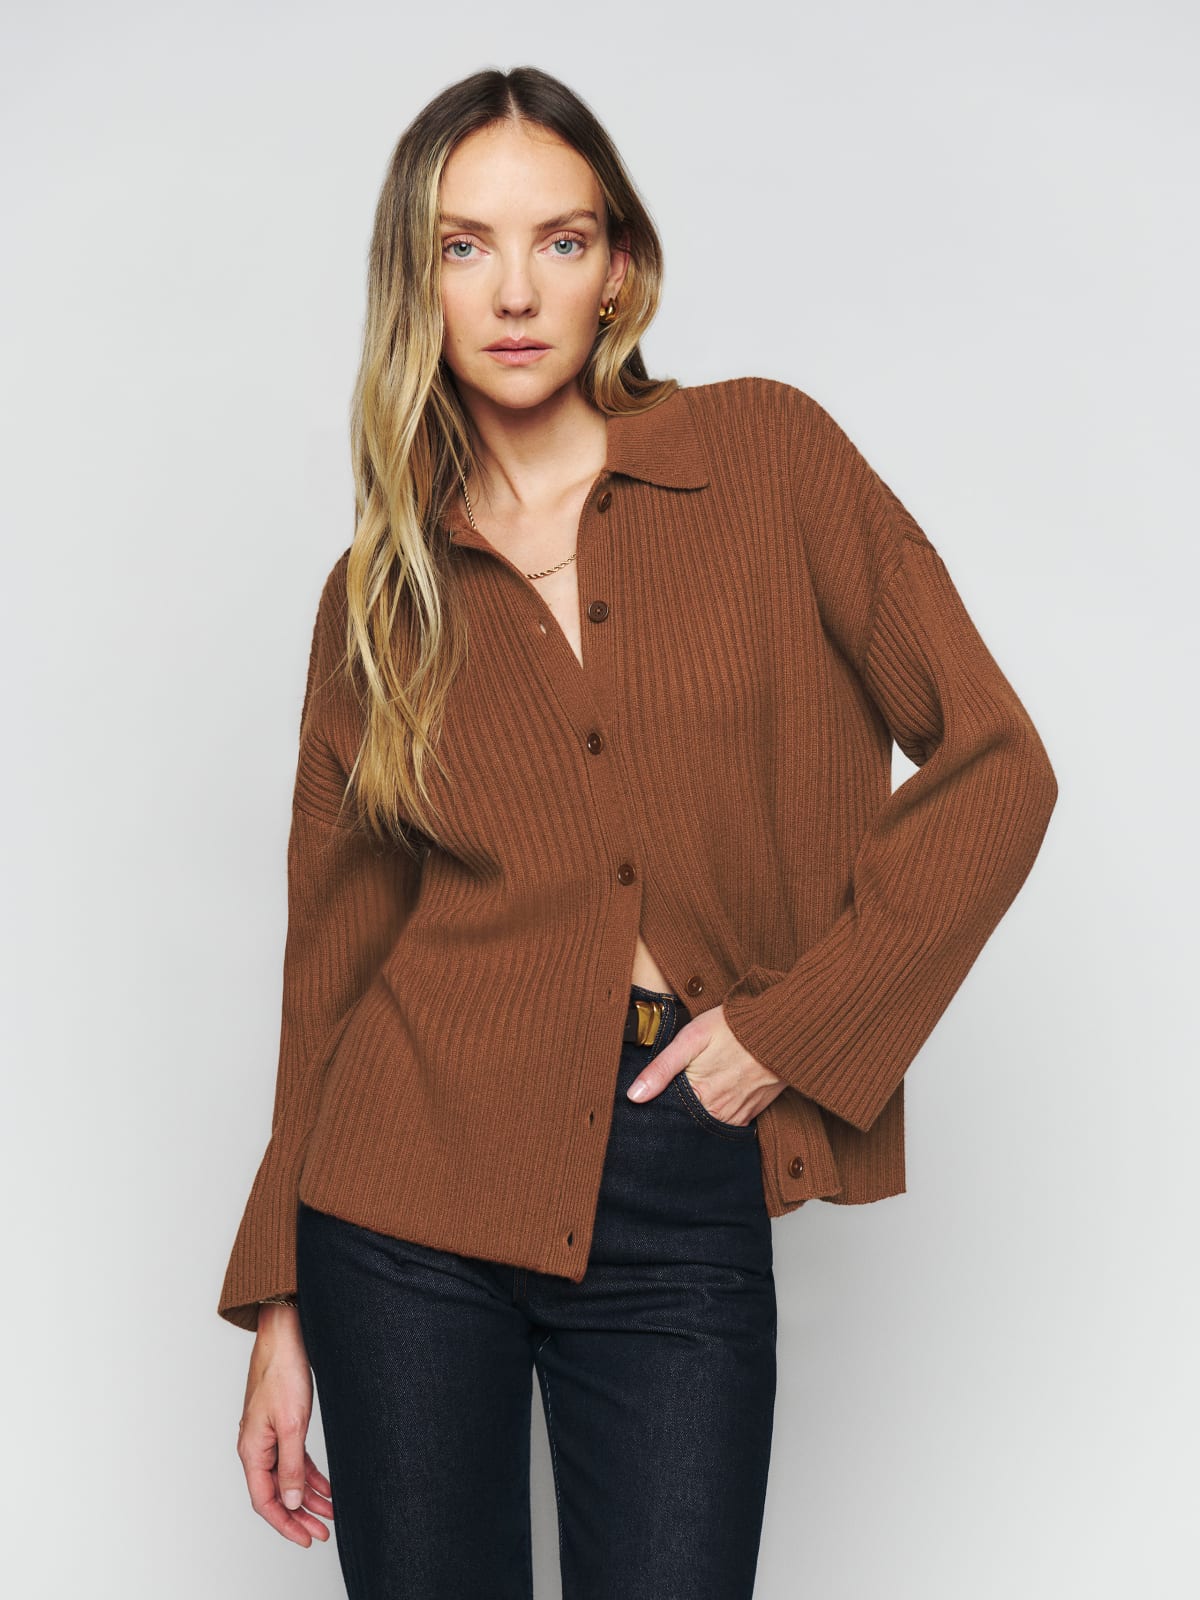 The Fantino from Reformation is a long sleeve, collared cardigan made out of soft, cashmere fabric. It features a deep v neckline and functional, center front buttons so you can wear it open or closed depending on your mood. This one comes in a chestnut colour. 